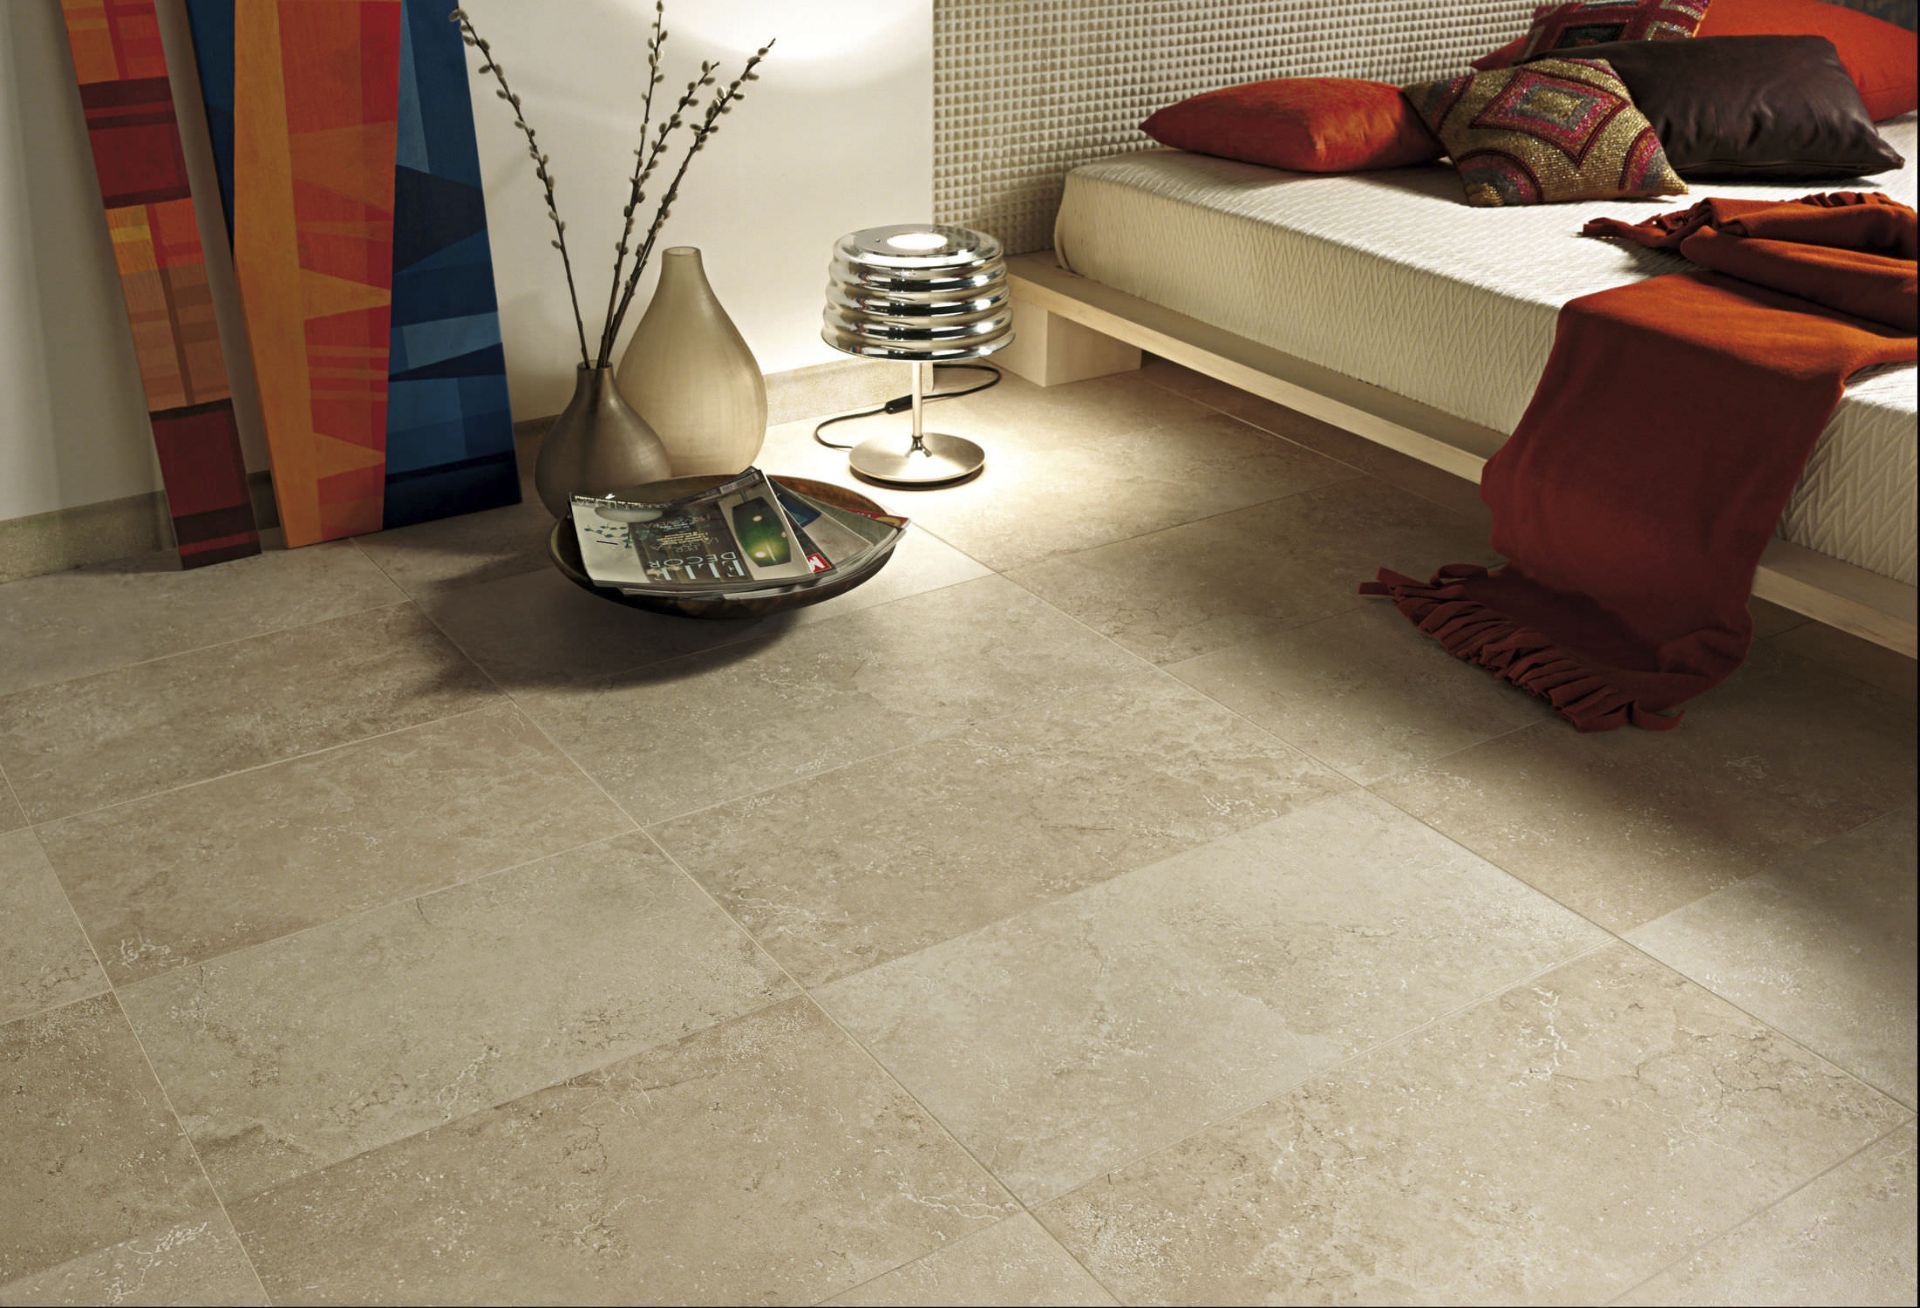 NEW 8.52m2 Hama Beige Wall and Floor Tiles. 450x450mm per tile, 10mm thick. Initially ceramic... - Bild 3 aus 3